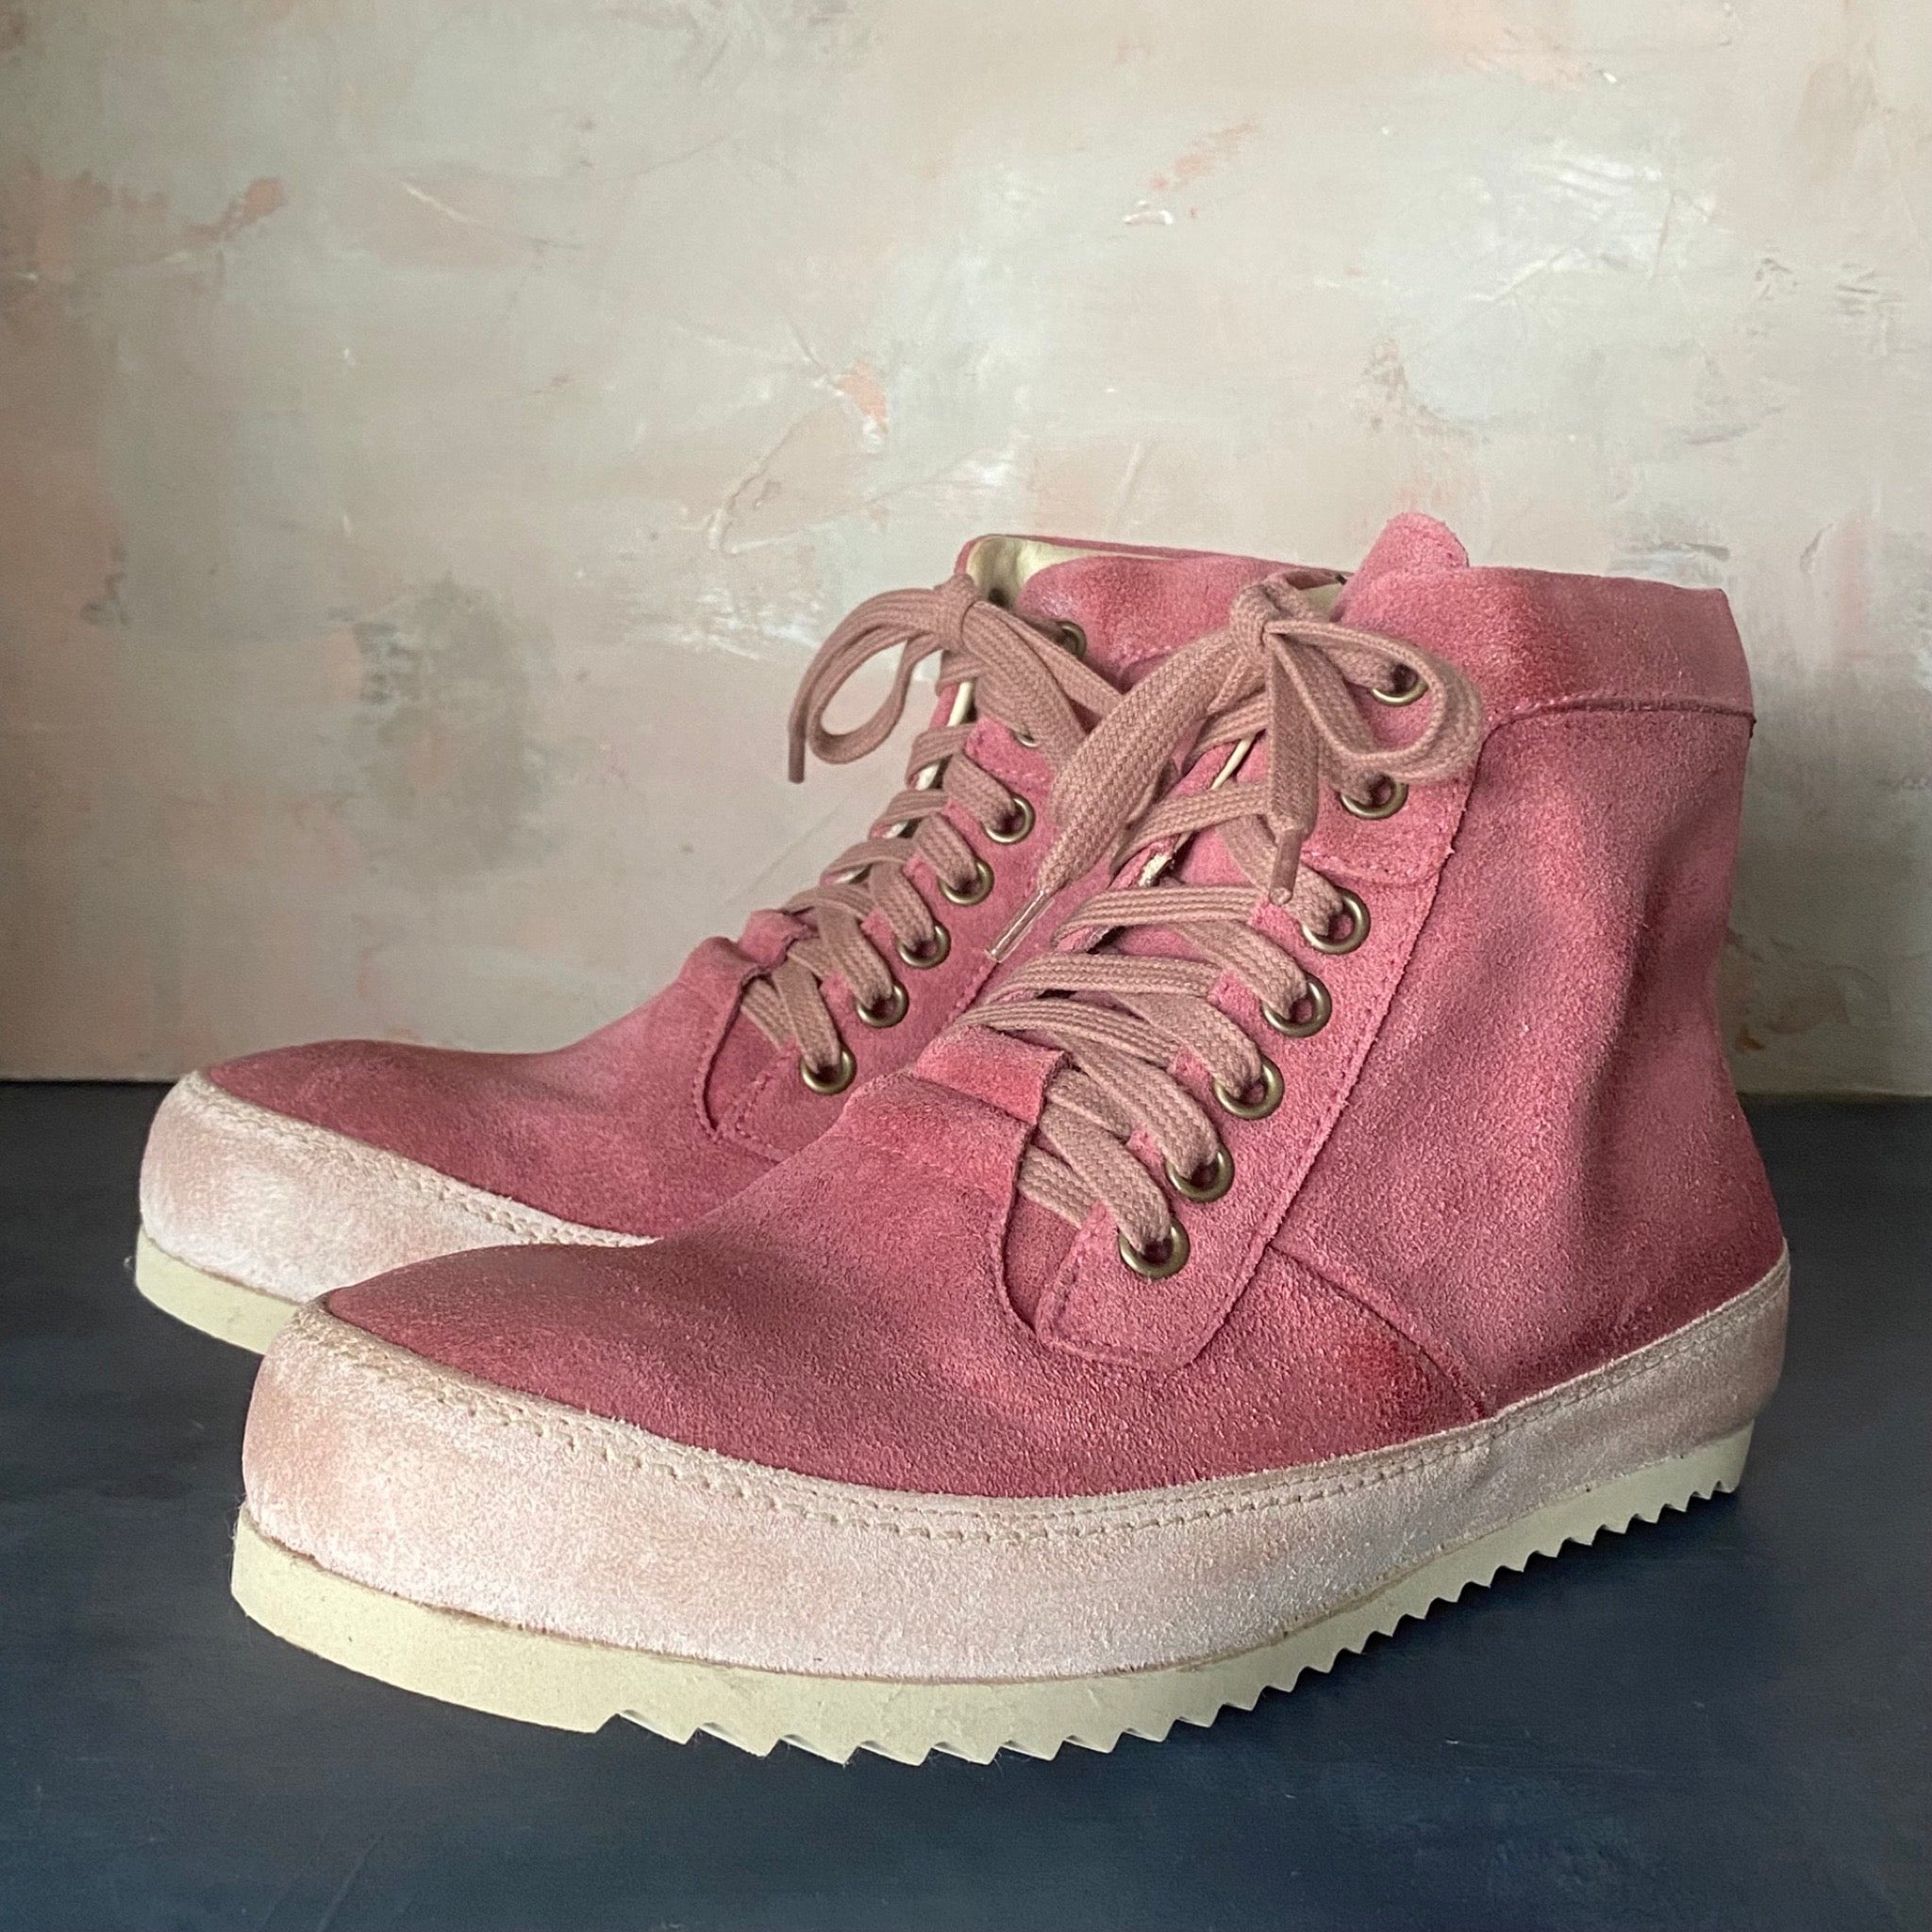 Victoria Varrasso Sportiva Two Tone Washed Pink Suede Hightops